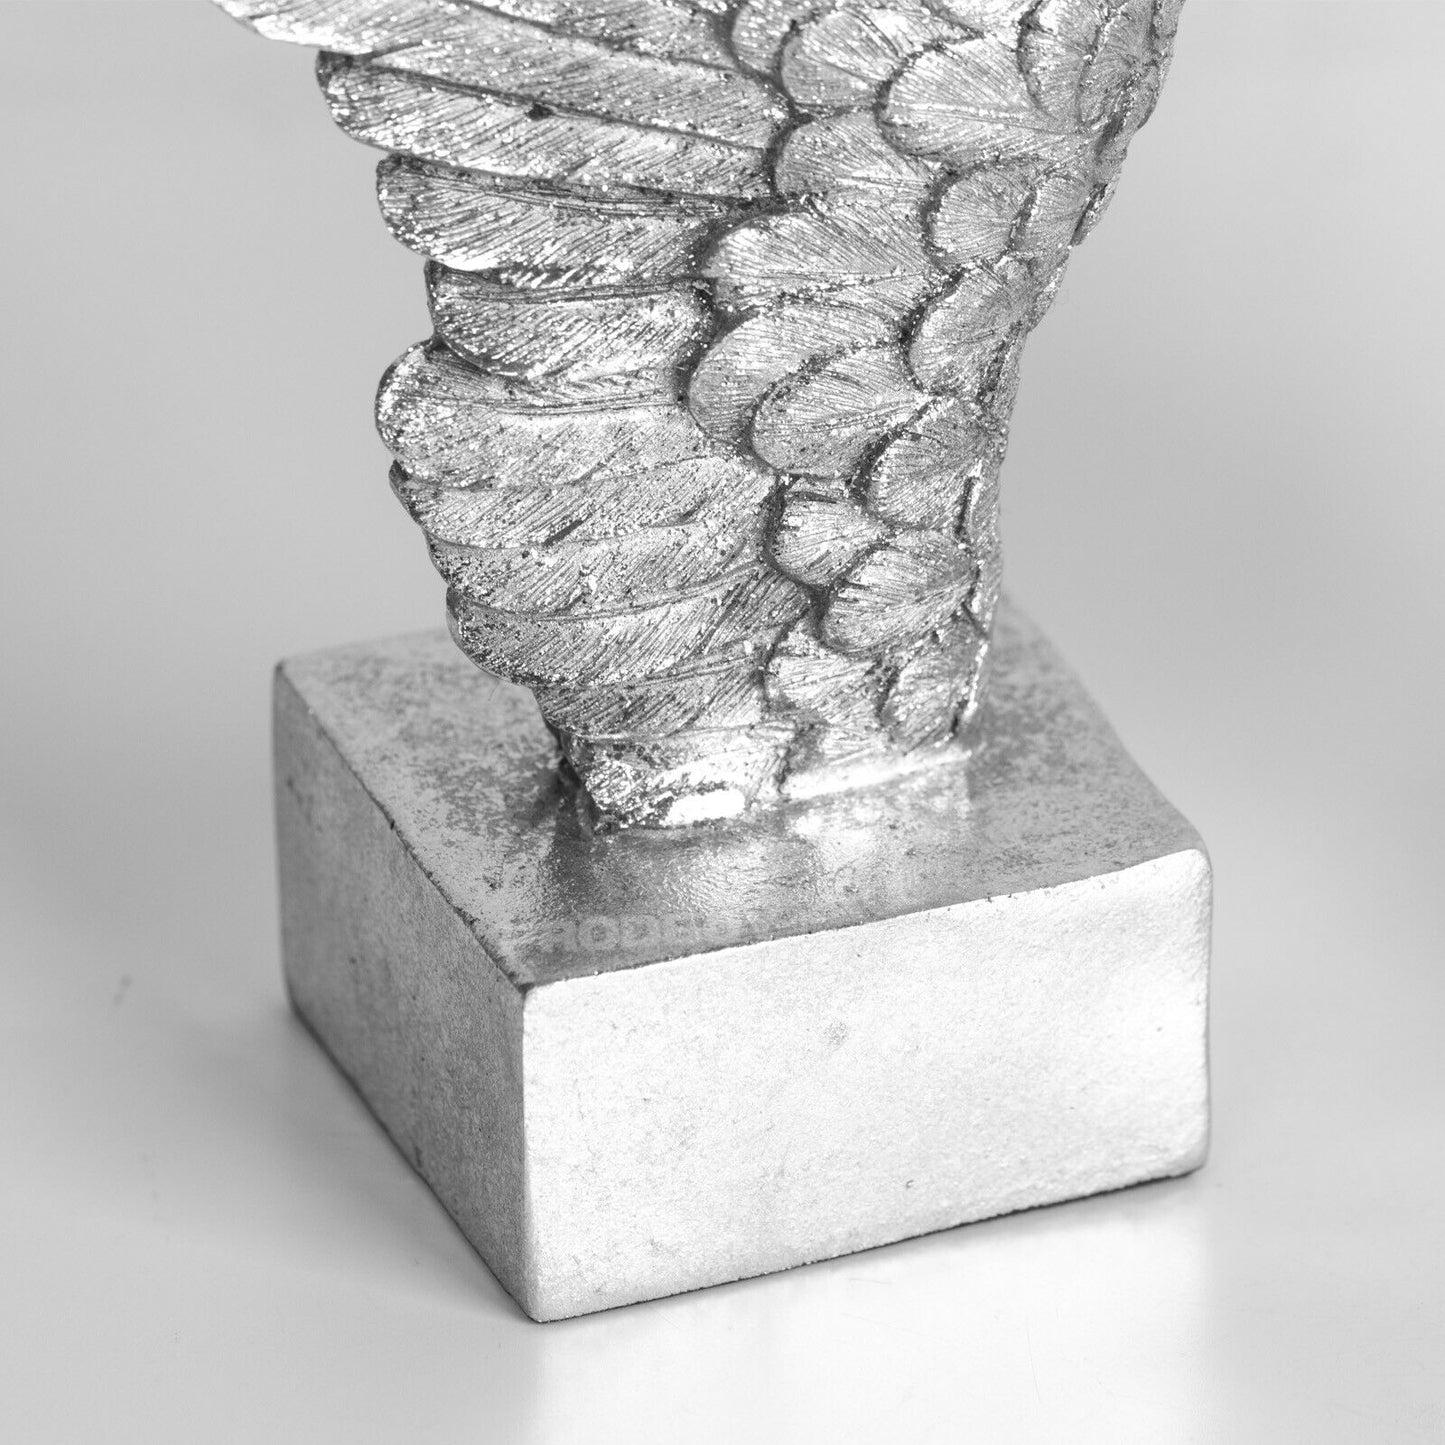 Large Silver 10" Pair of Angel Wings Bookends